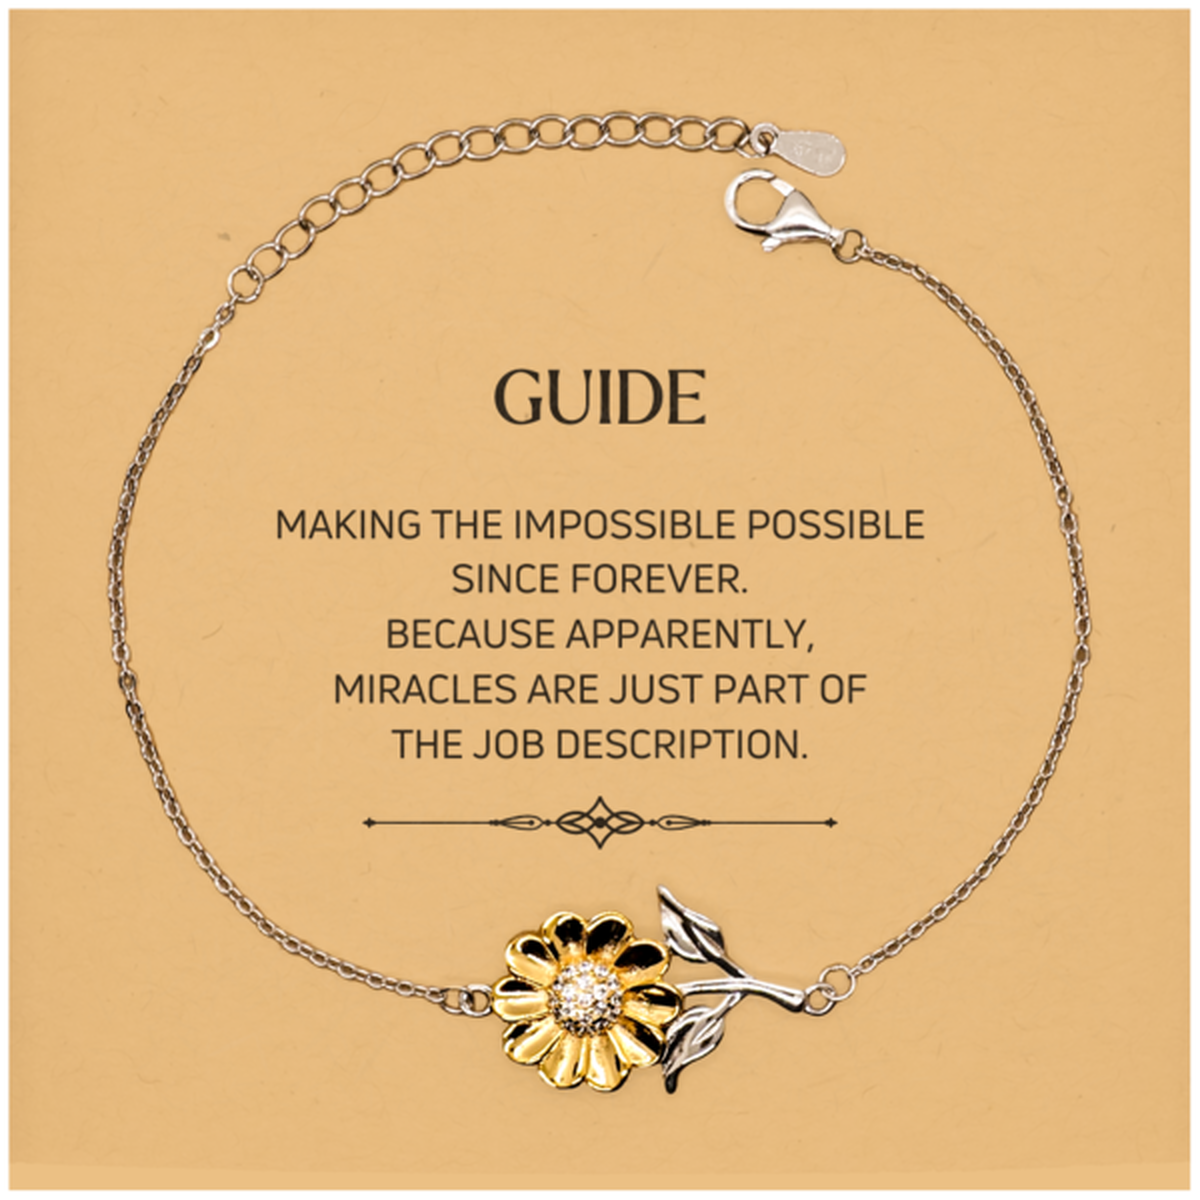 Funny Guide Gifts, Miracles are just part of the job description, Inspirational Birthday Christmas Sunflower Bracelet For Guide, Men, Women, Coworkers, Friends, Boss